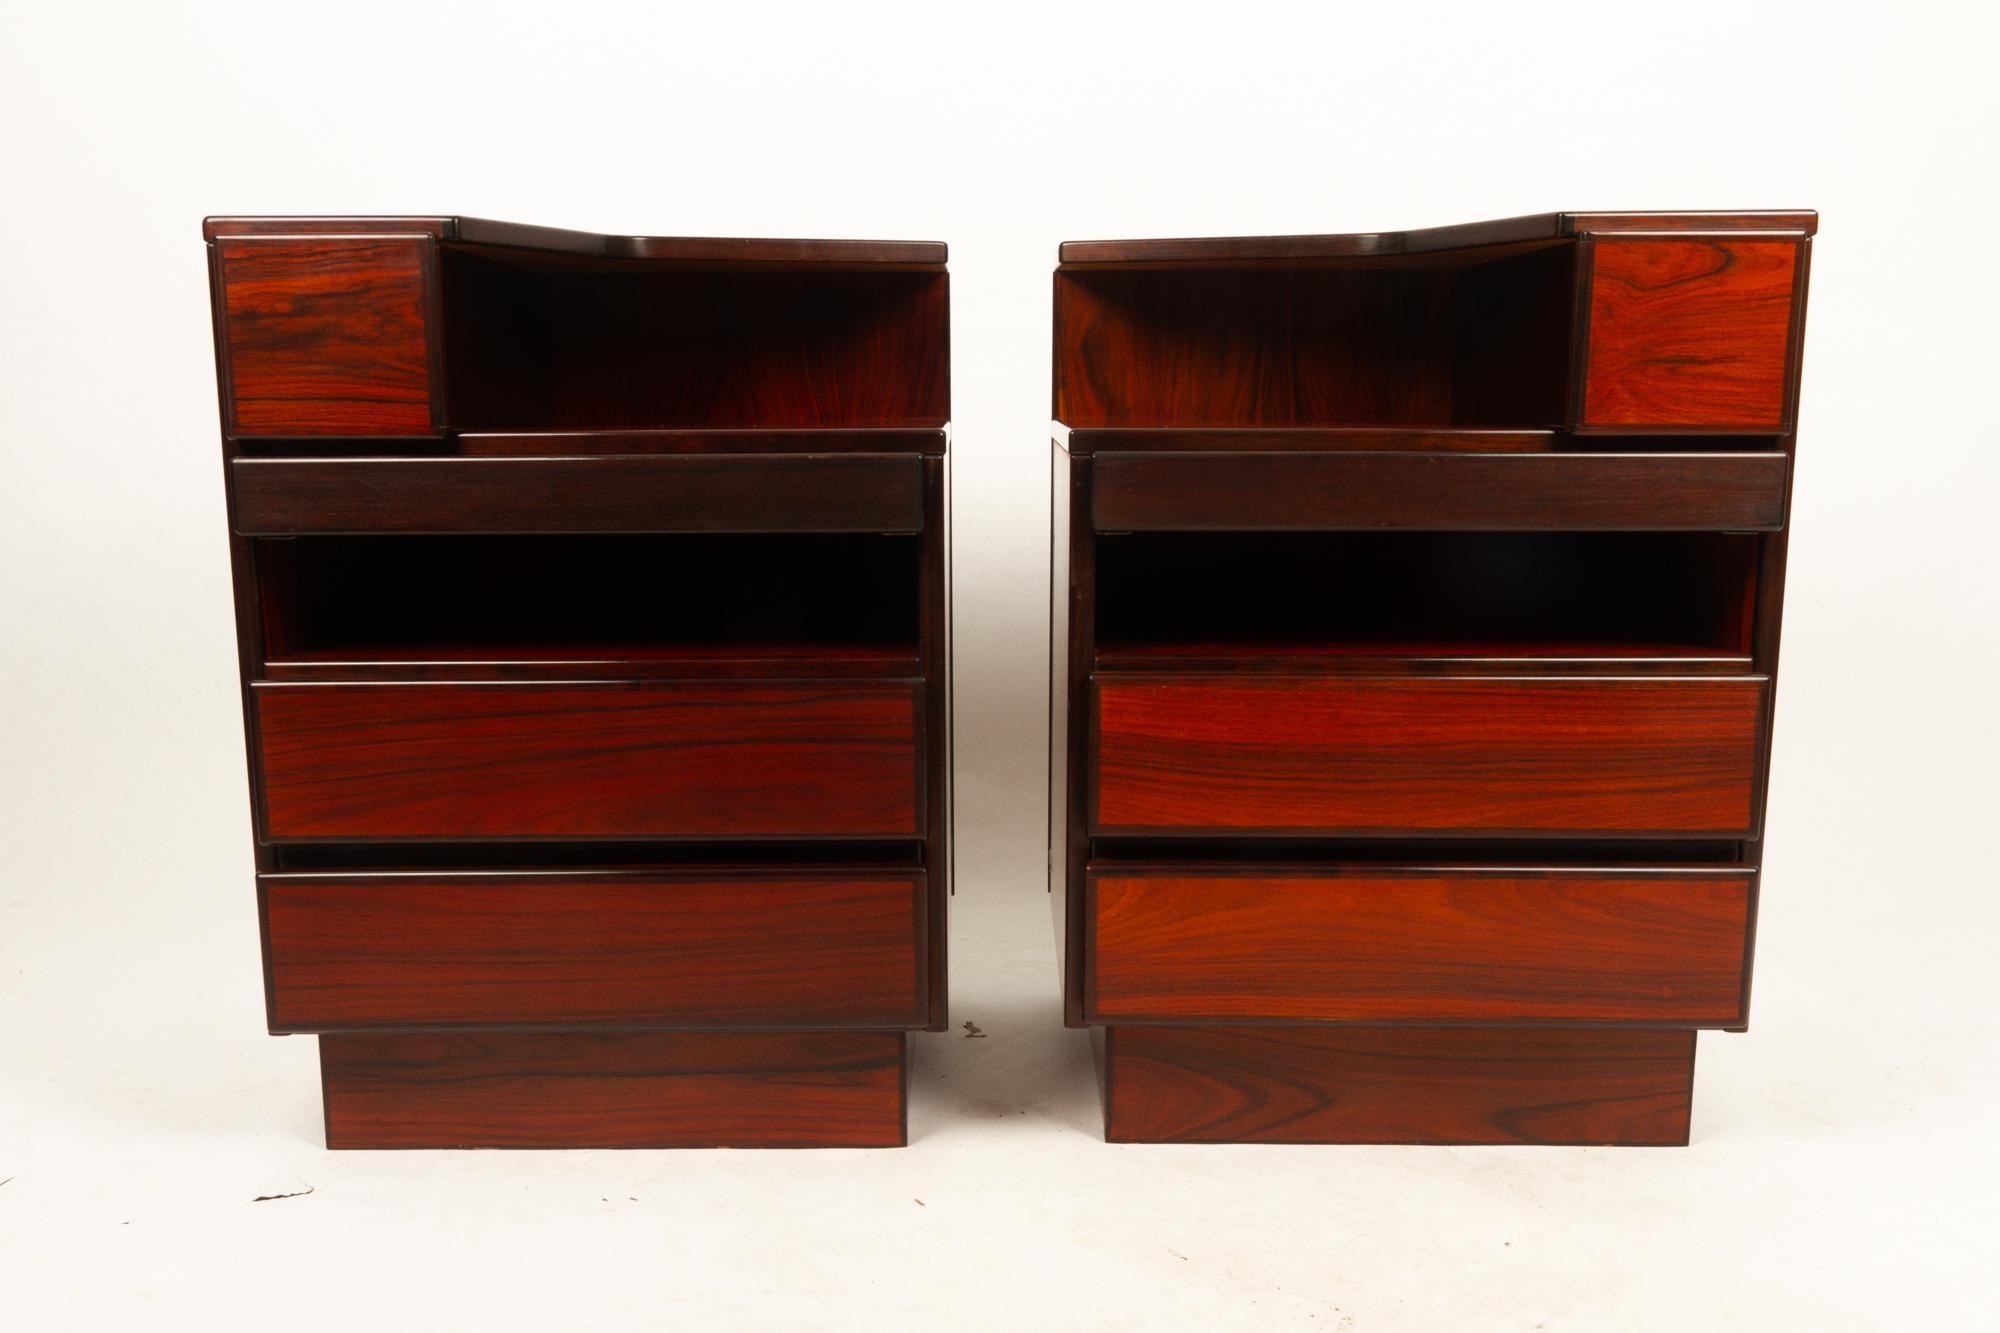 Pair of Danish vintage rosewood nightstands, 1970s
Set of 1970s nightstands in Rosewood with drawers and extendable shelf with detachable tray. Lots of storage space. Very smooth running drawers. High build quality, very study construction. Made by